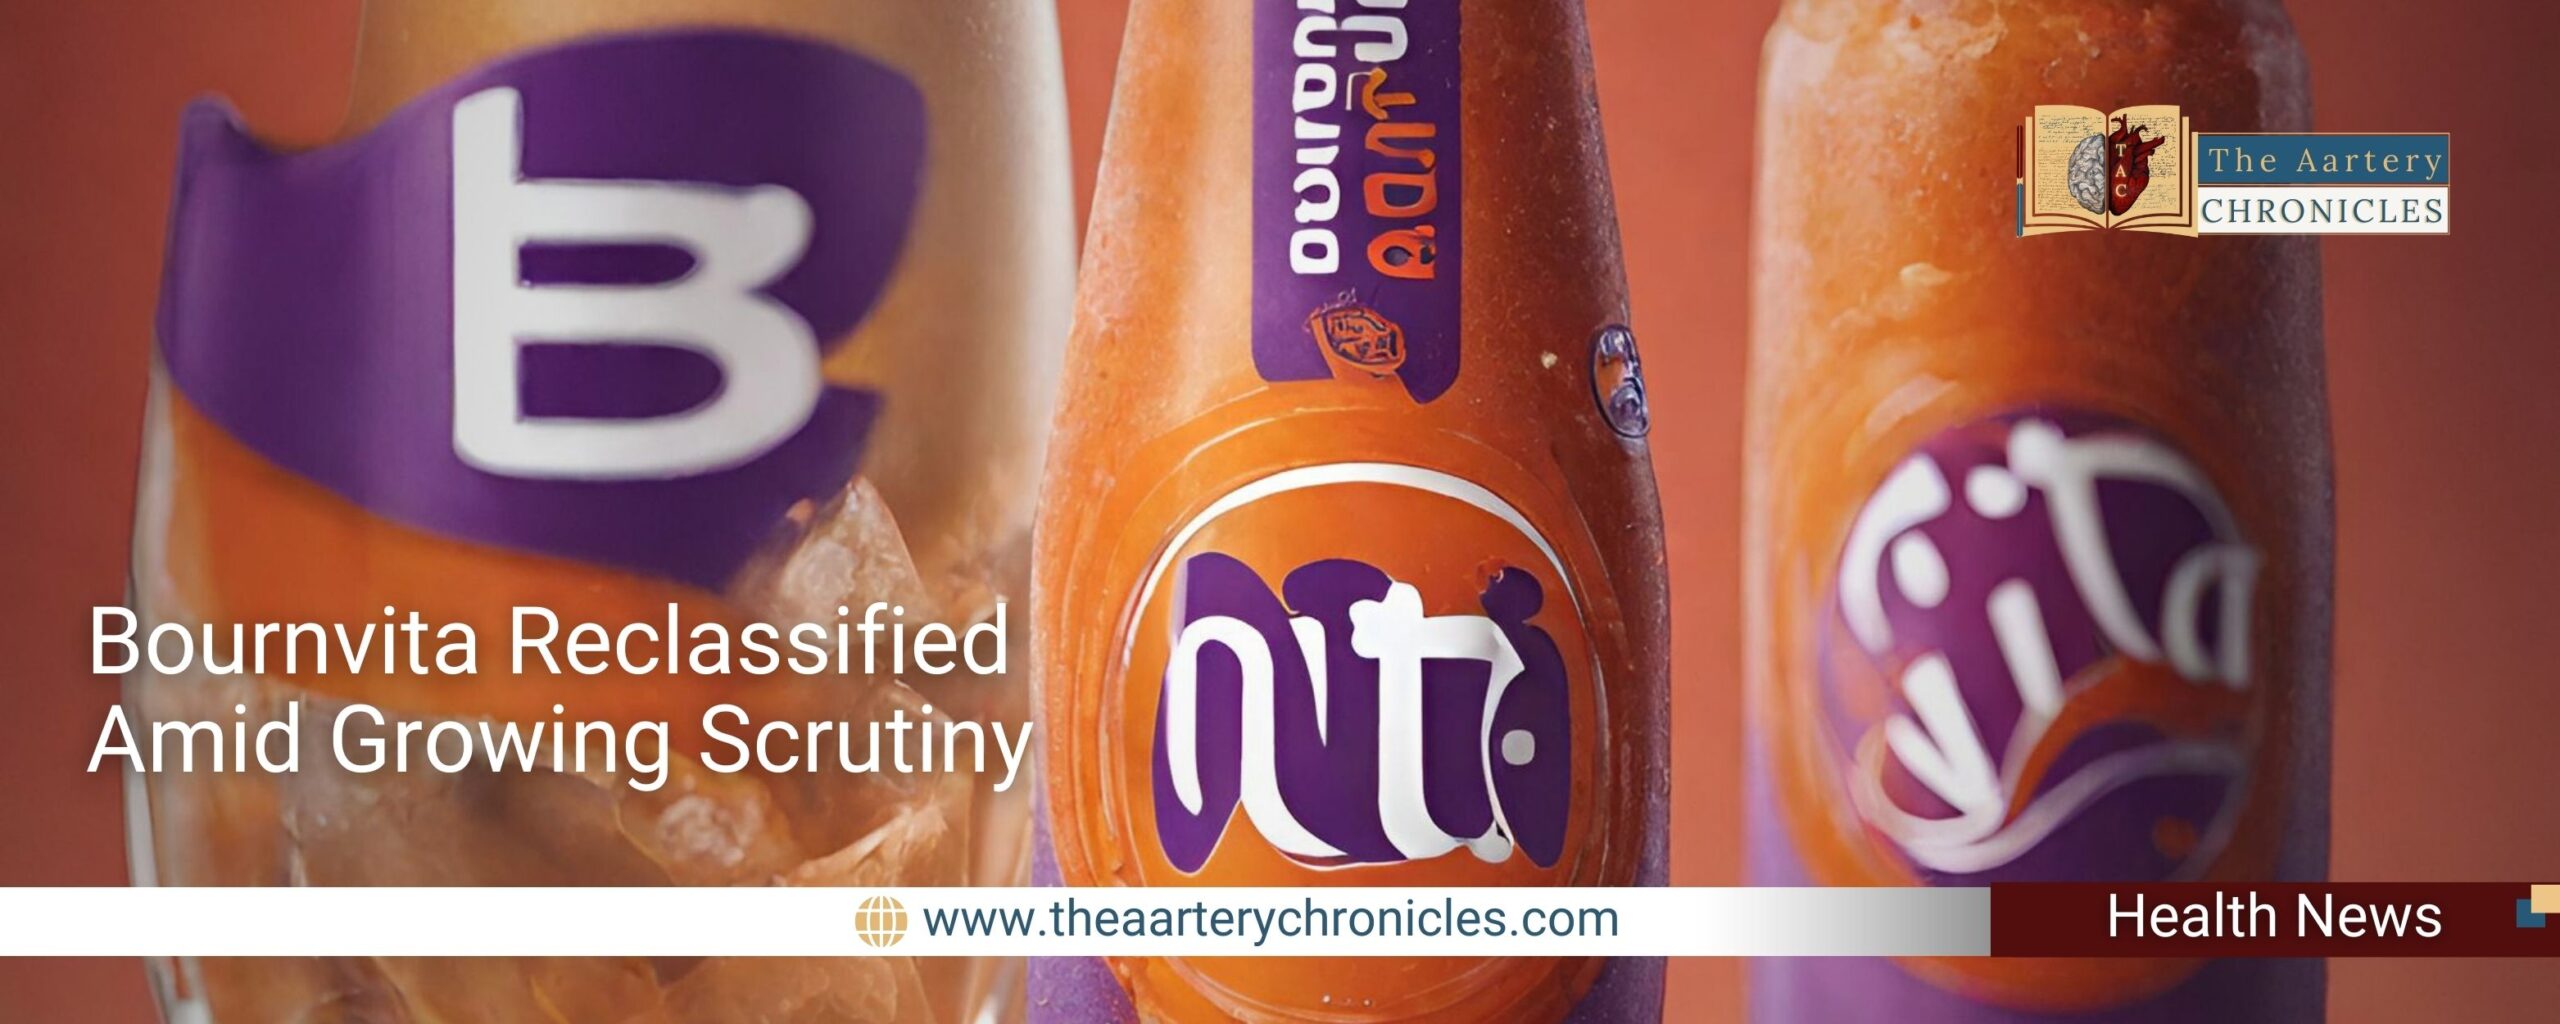 Bournvita- Reclassified-Amid-Growing-Scrutiny-the-aartery-chronicles-tac